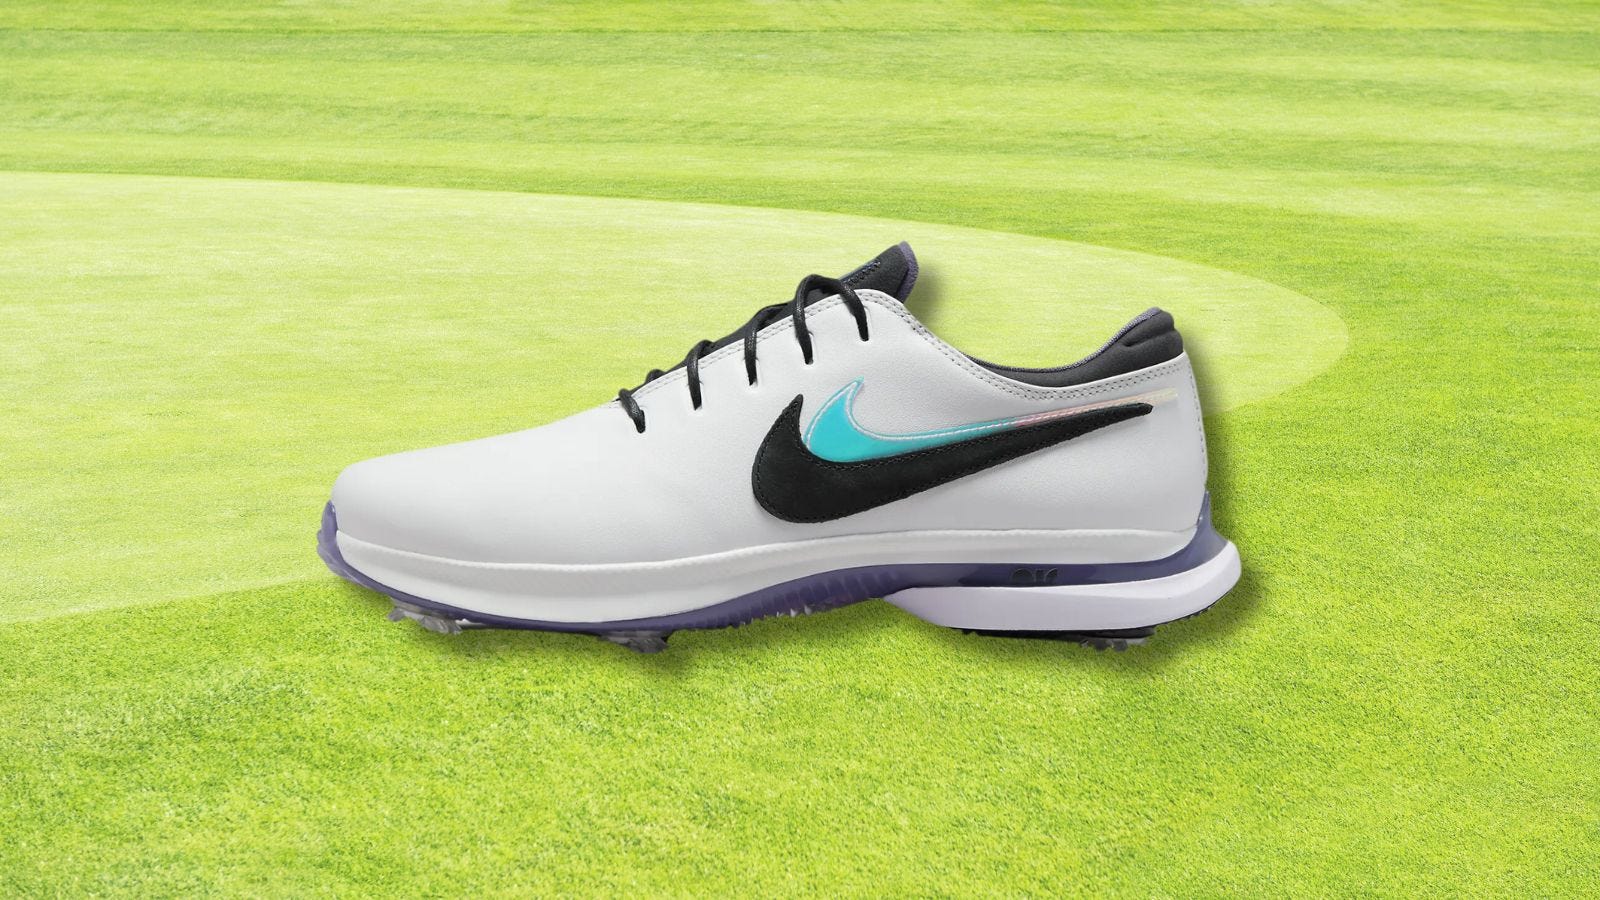 picture of nike air zoom victory tour 3 nrg golf shoe set against a golf greens background